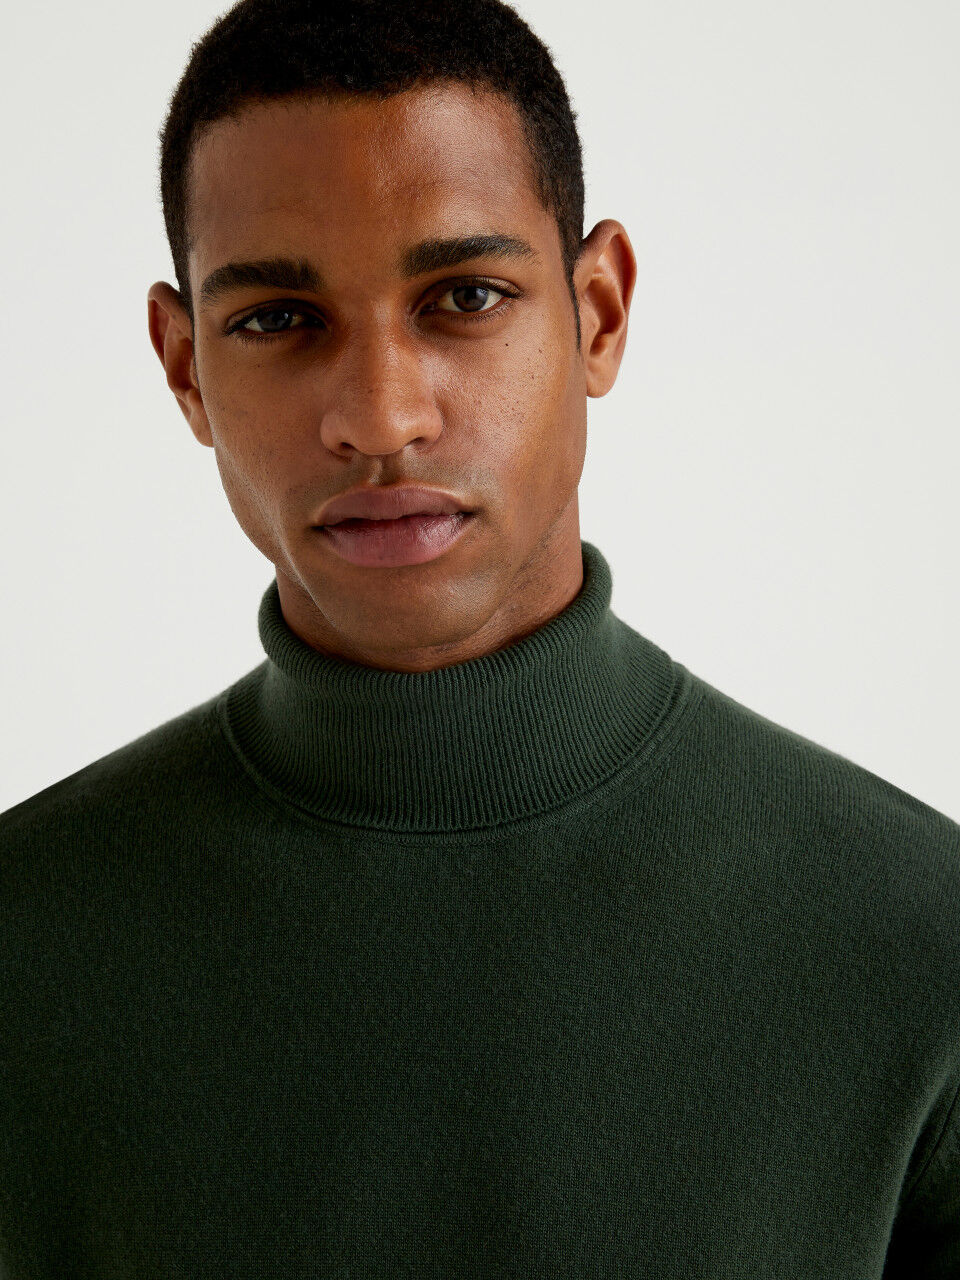 Men's High Neck Sweaters New Collection ...